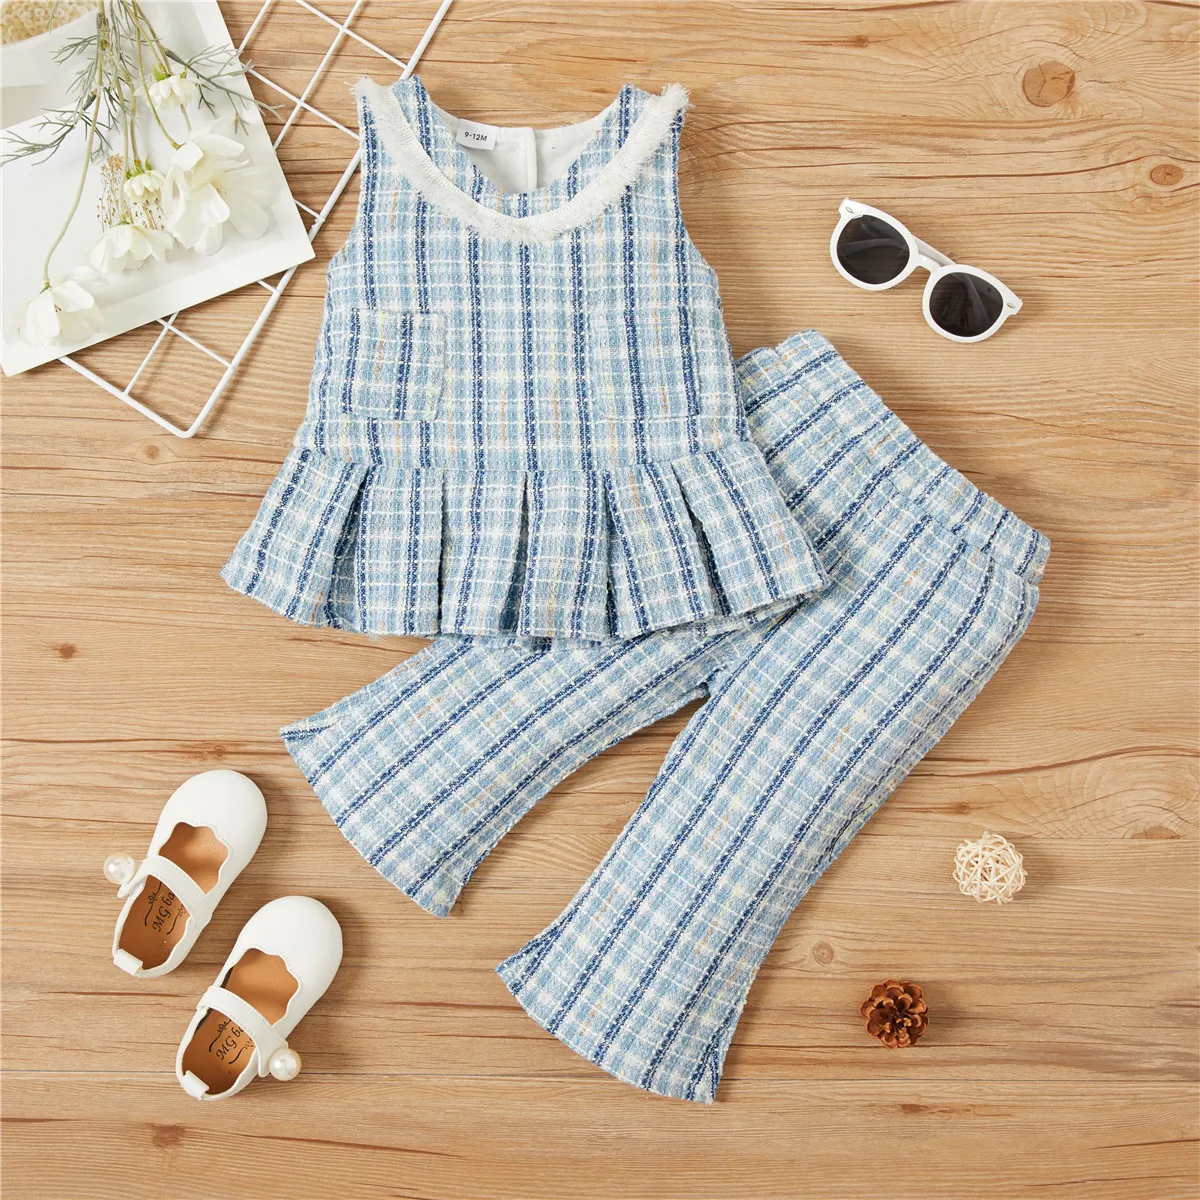 

Toddler Cute Kids Girl Clothes Newest Fashion Breasted Plaid Ruffle Top Flared Trousers Holiday Causal Clothes Outfits